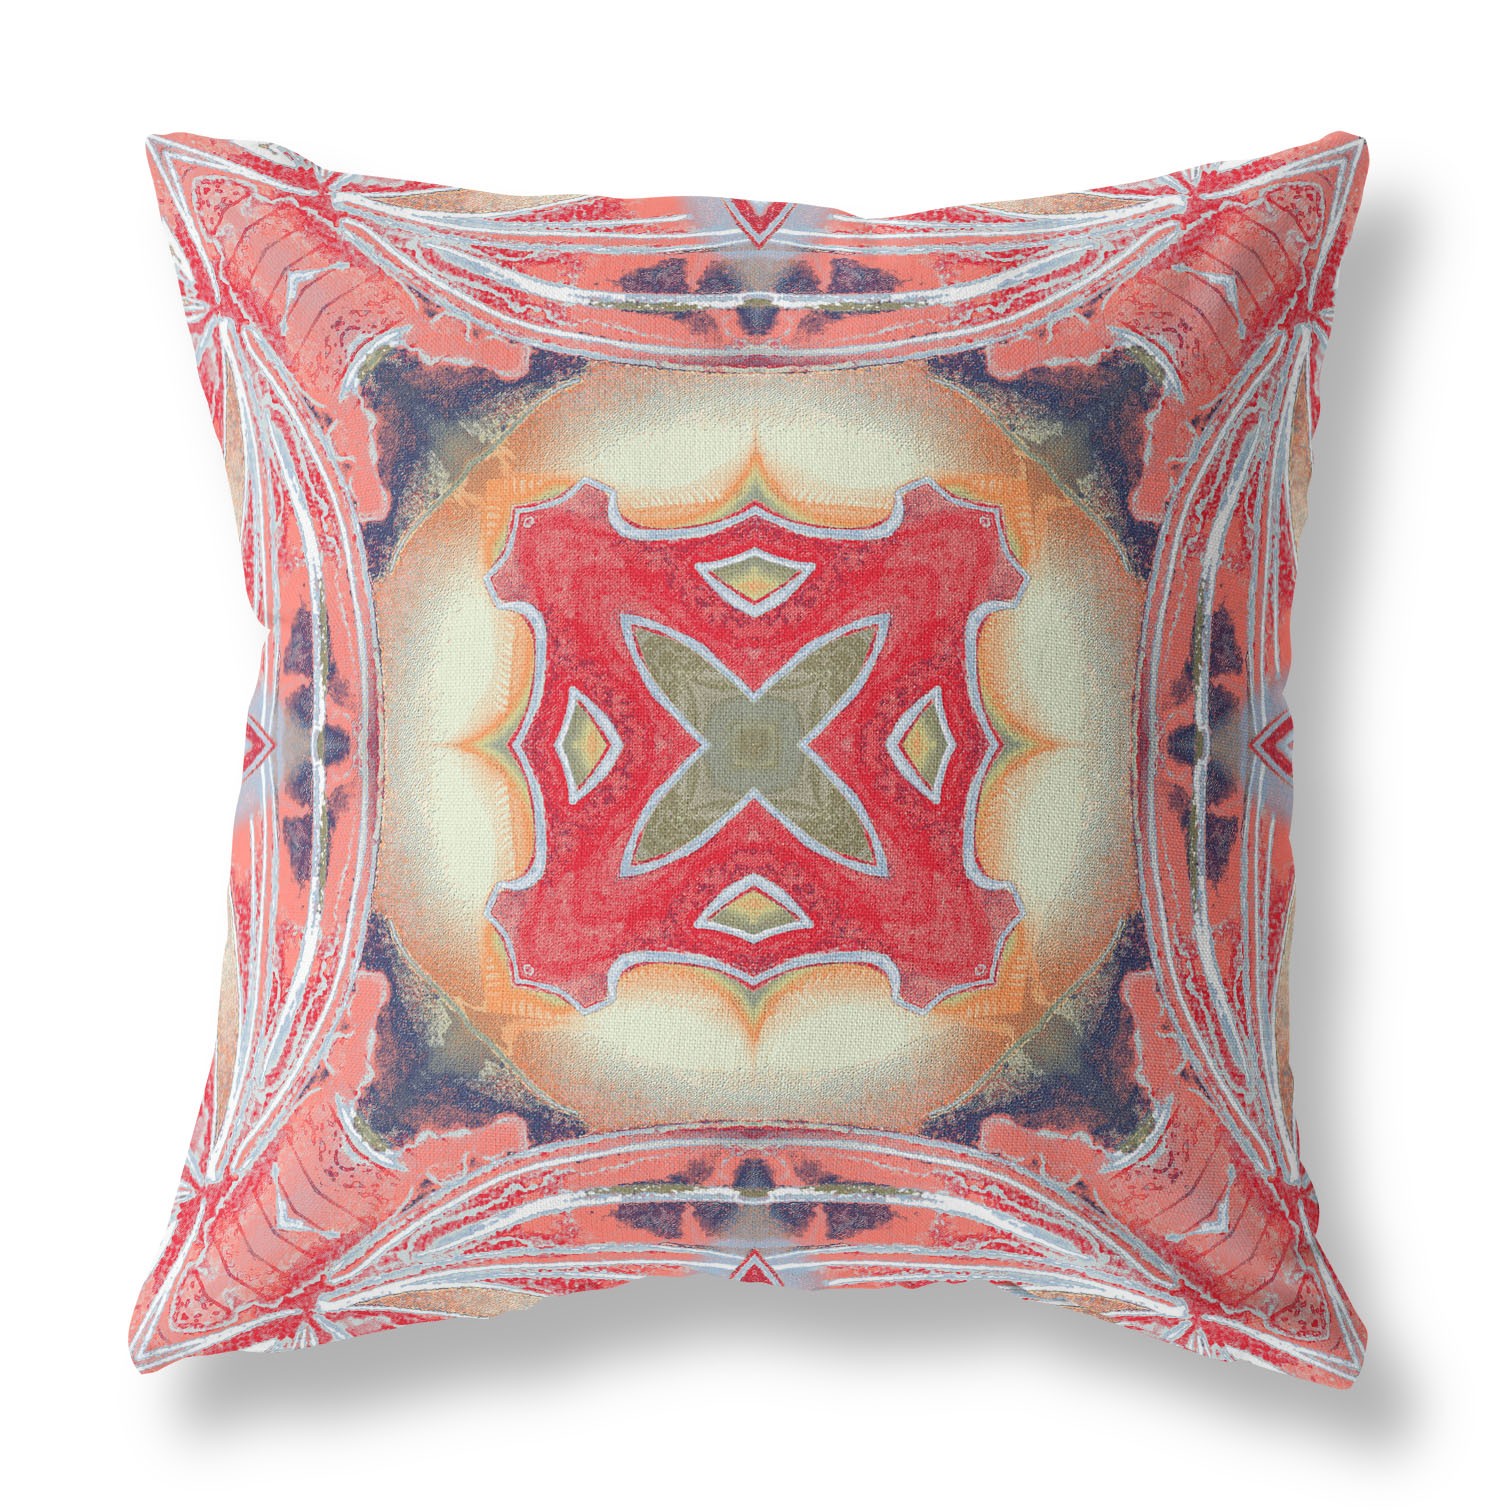 20” Peach Red Geo Tribal Suede Throw Pillow-412072-1